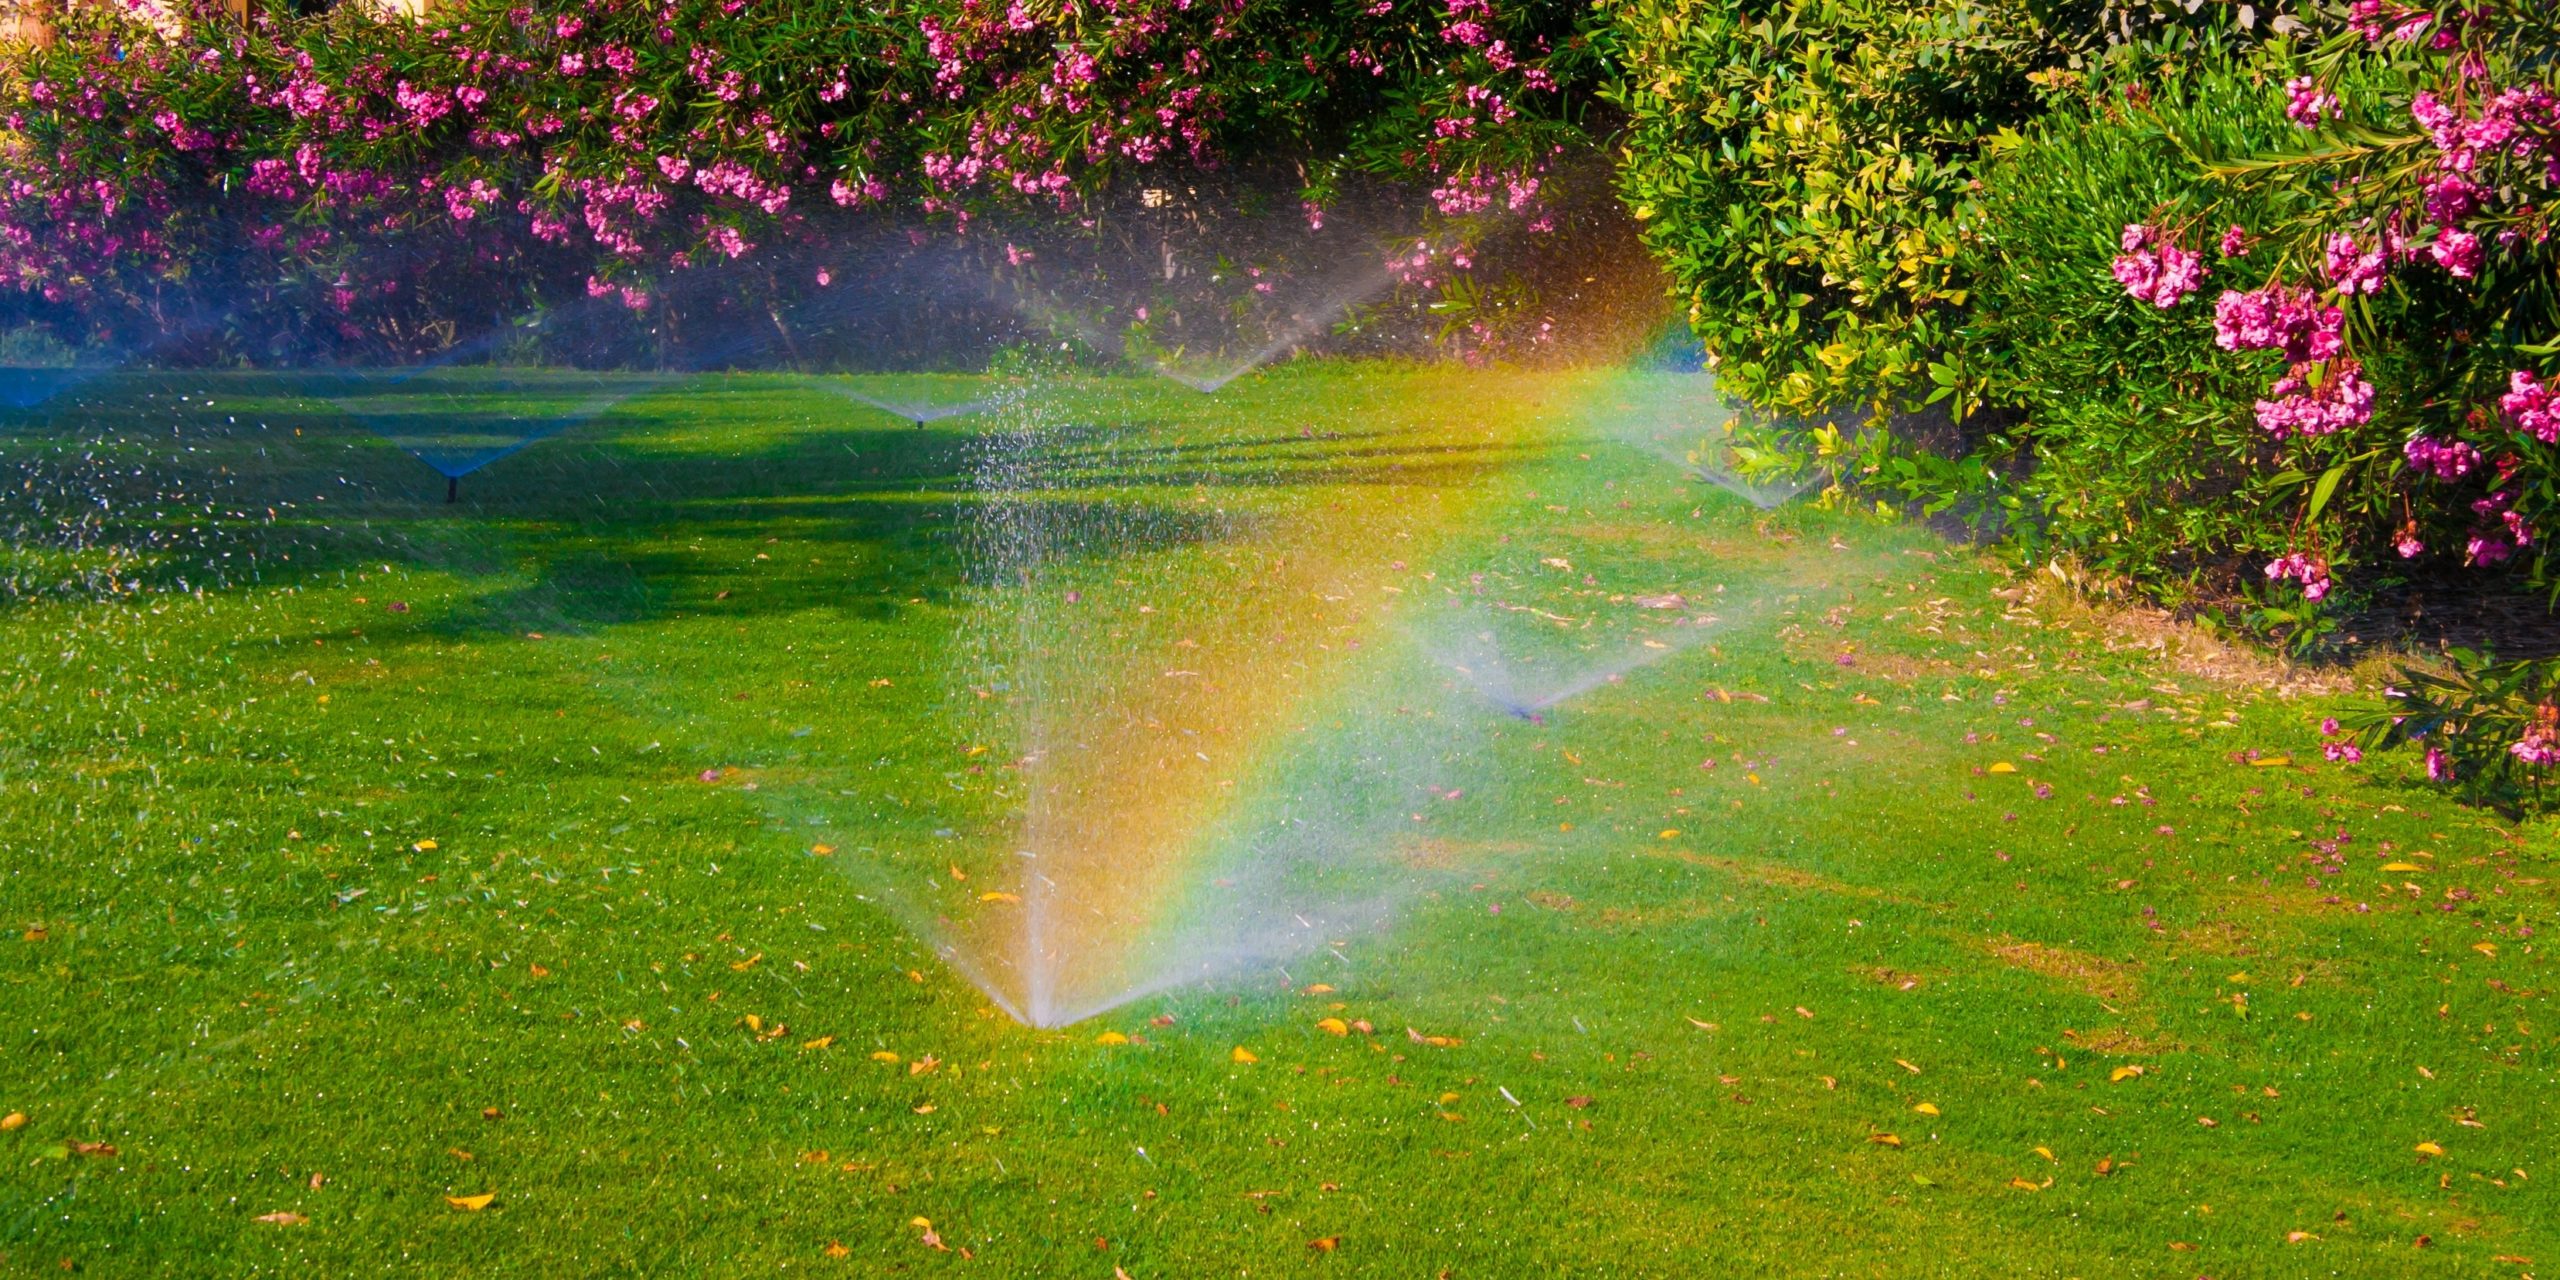 water your lawn